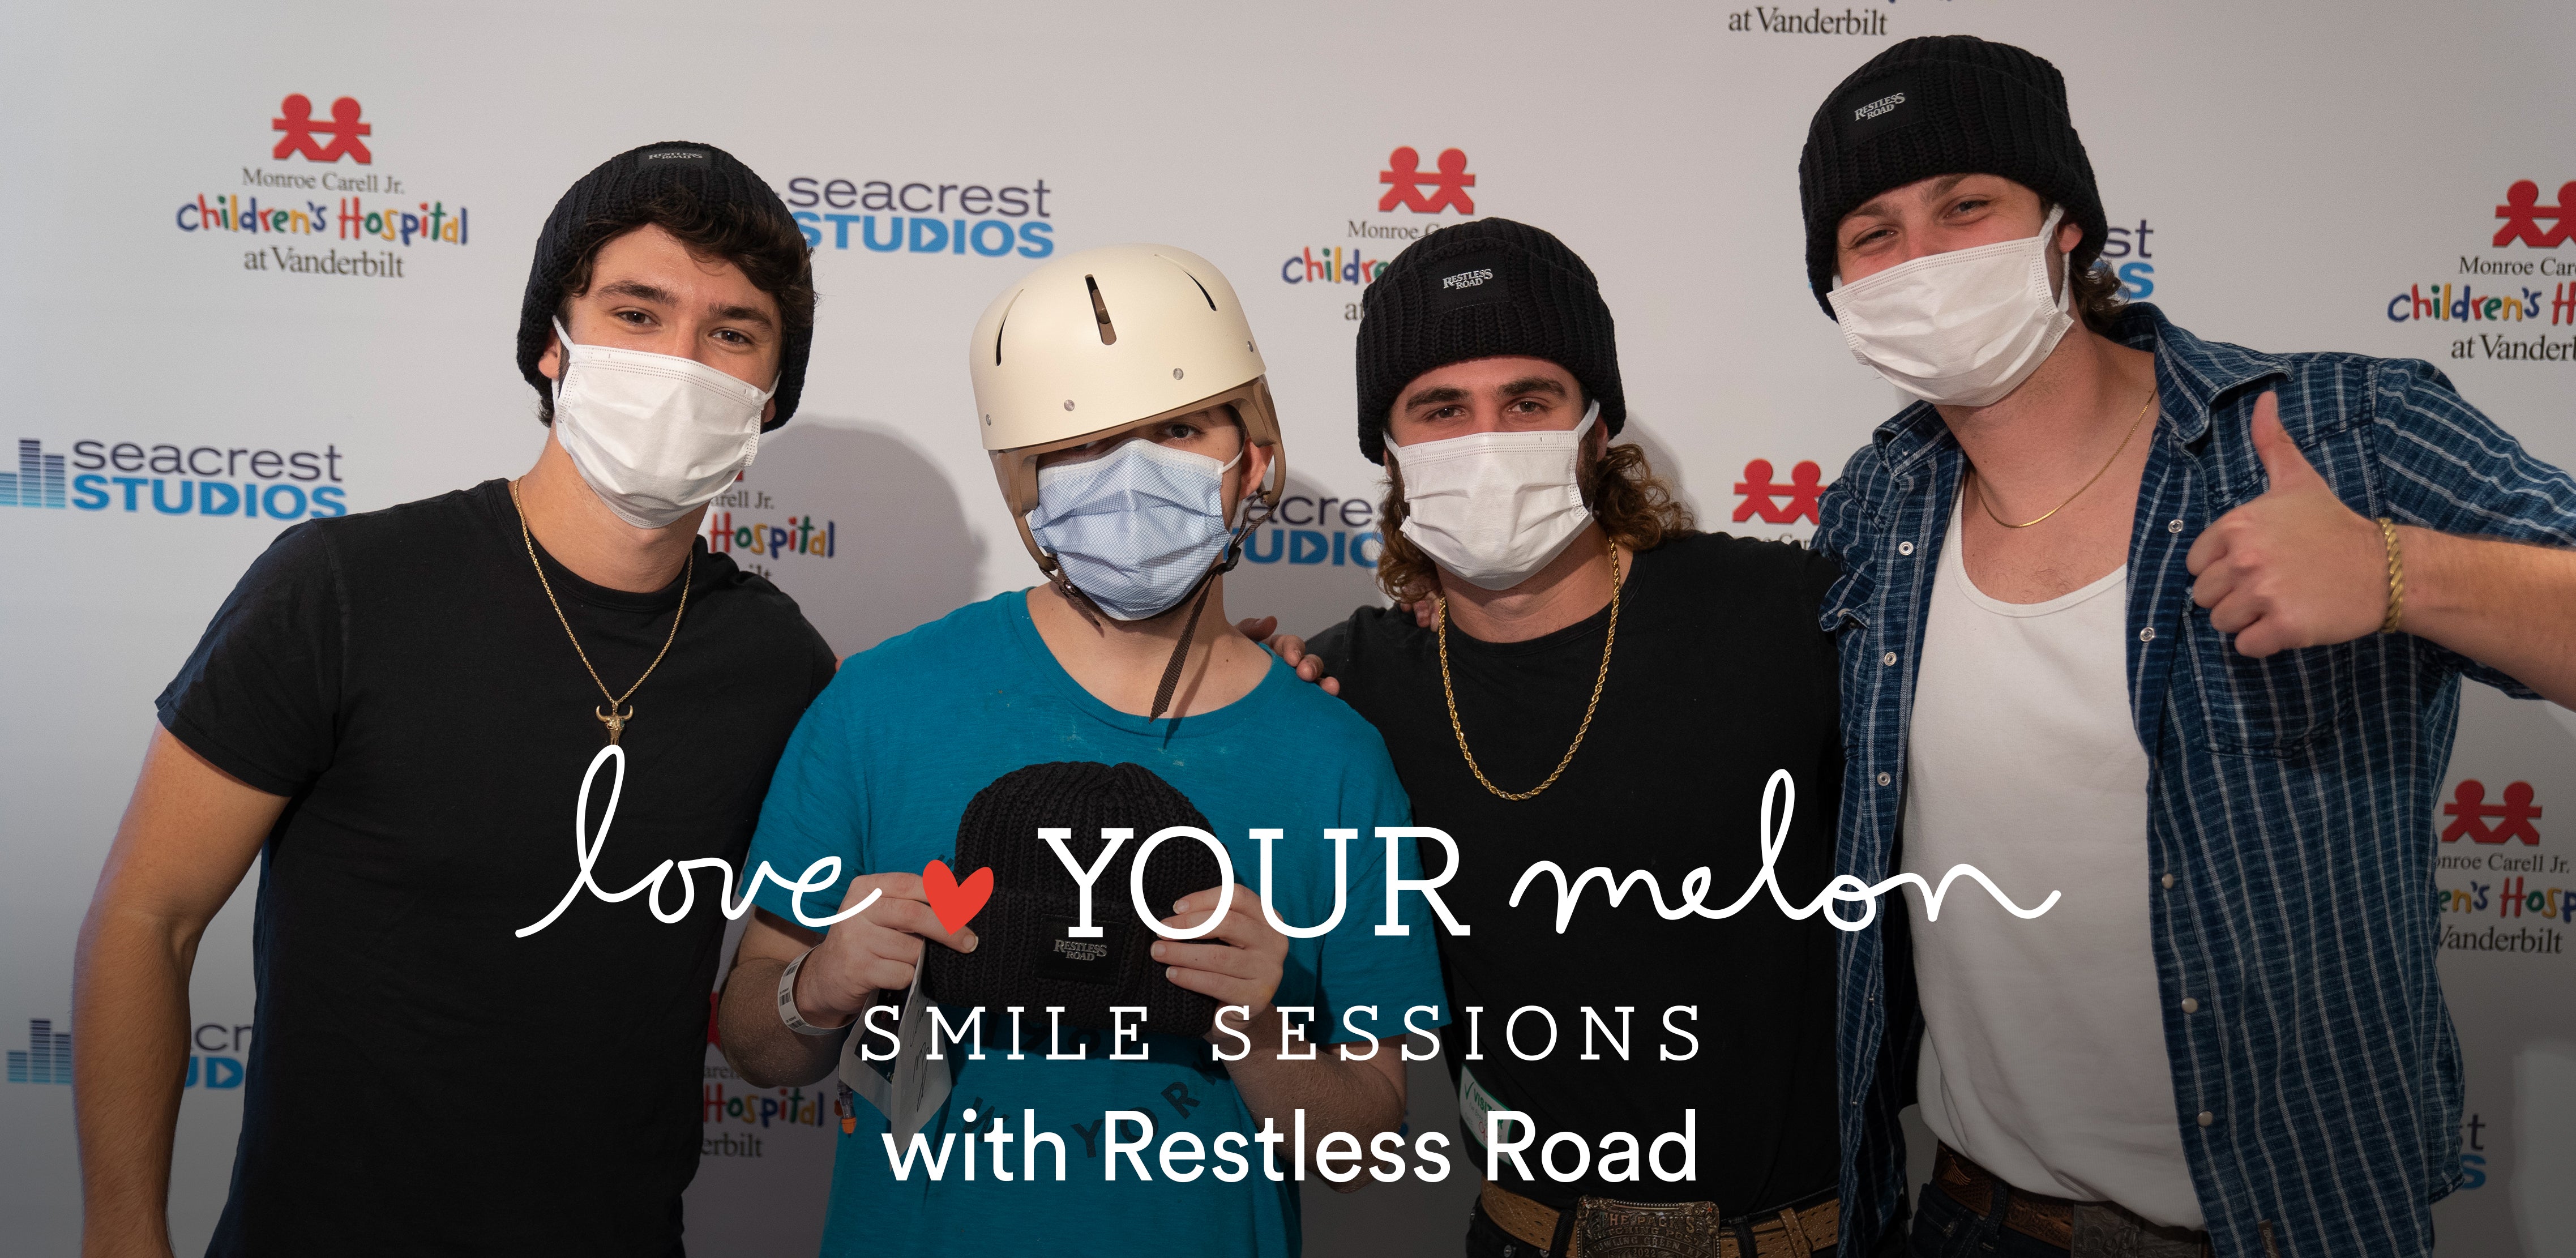 Pediatric Cancer Awareness Month: Smile Session with Reckless Road